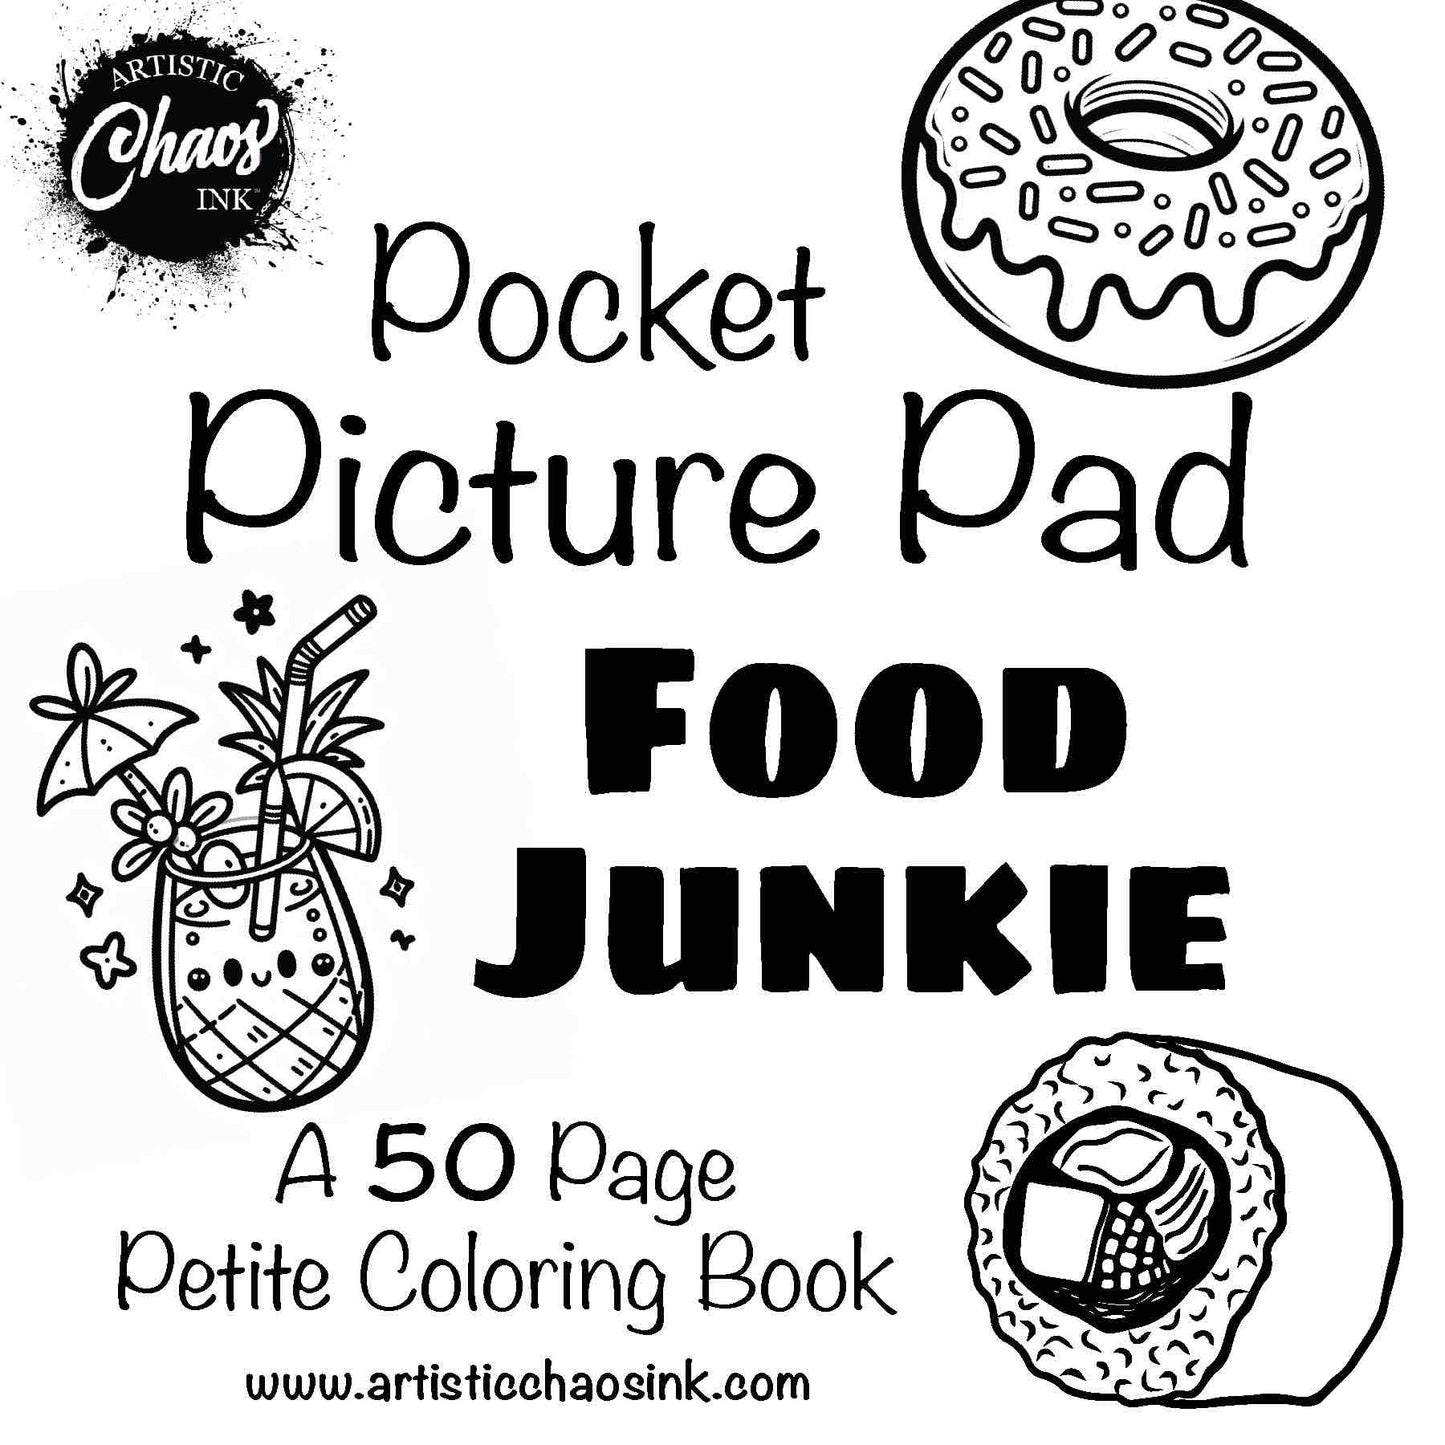 Pocket Coloring Book, Small Coloring Pages, Minimalist, Tiny Books, Kids Coloring Book, Small Art, Adult Coloring Book, Pocket Color, Travel